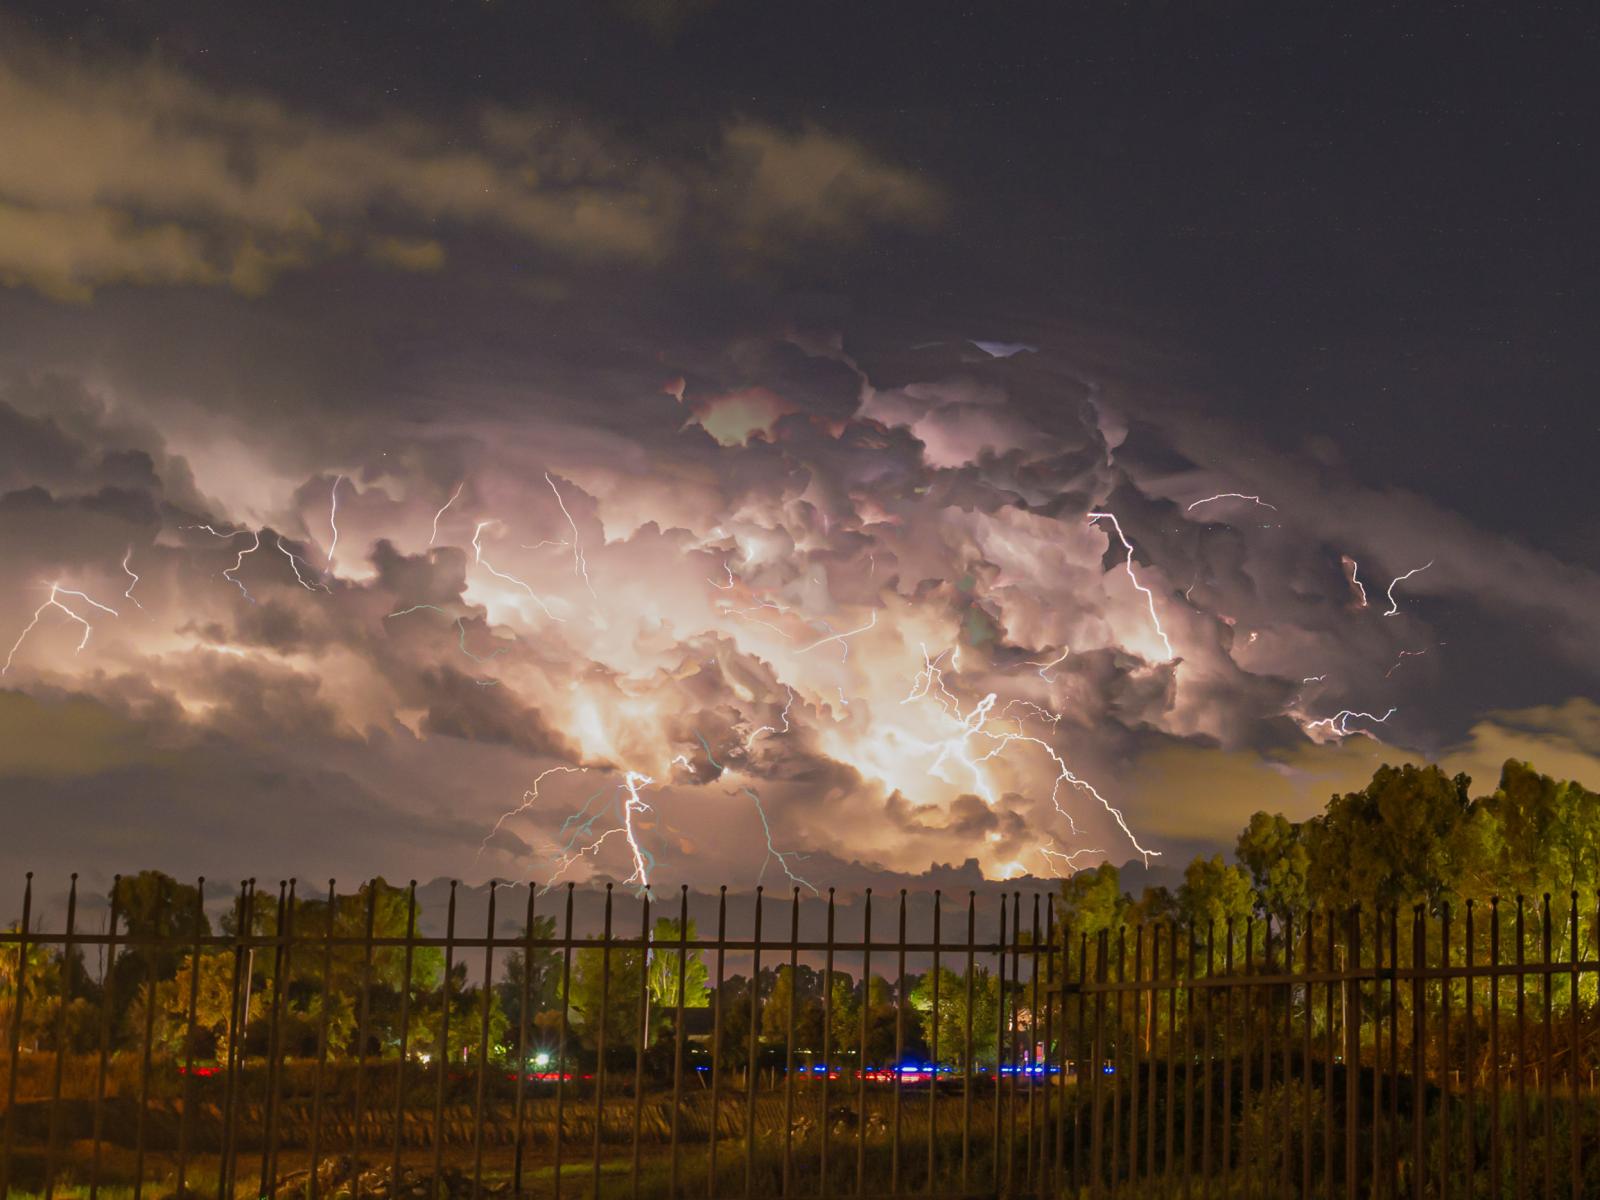 Photograph of a storm with lightning and clouds